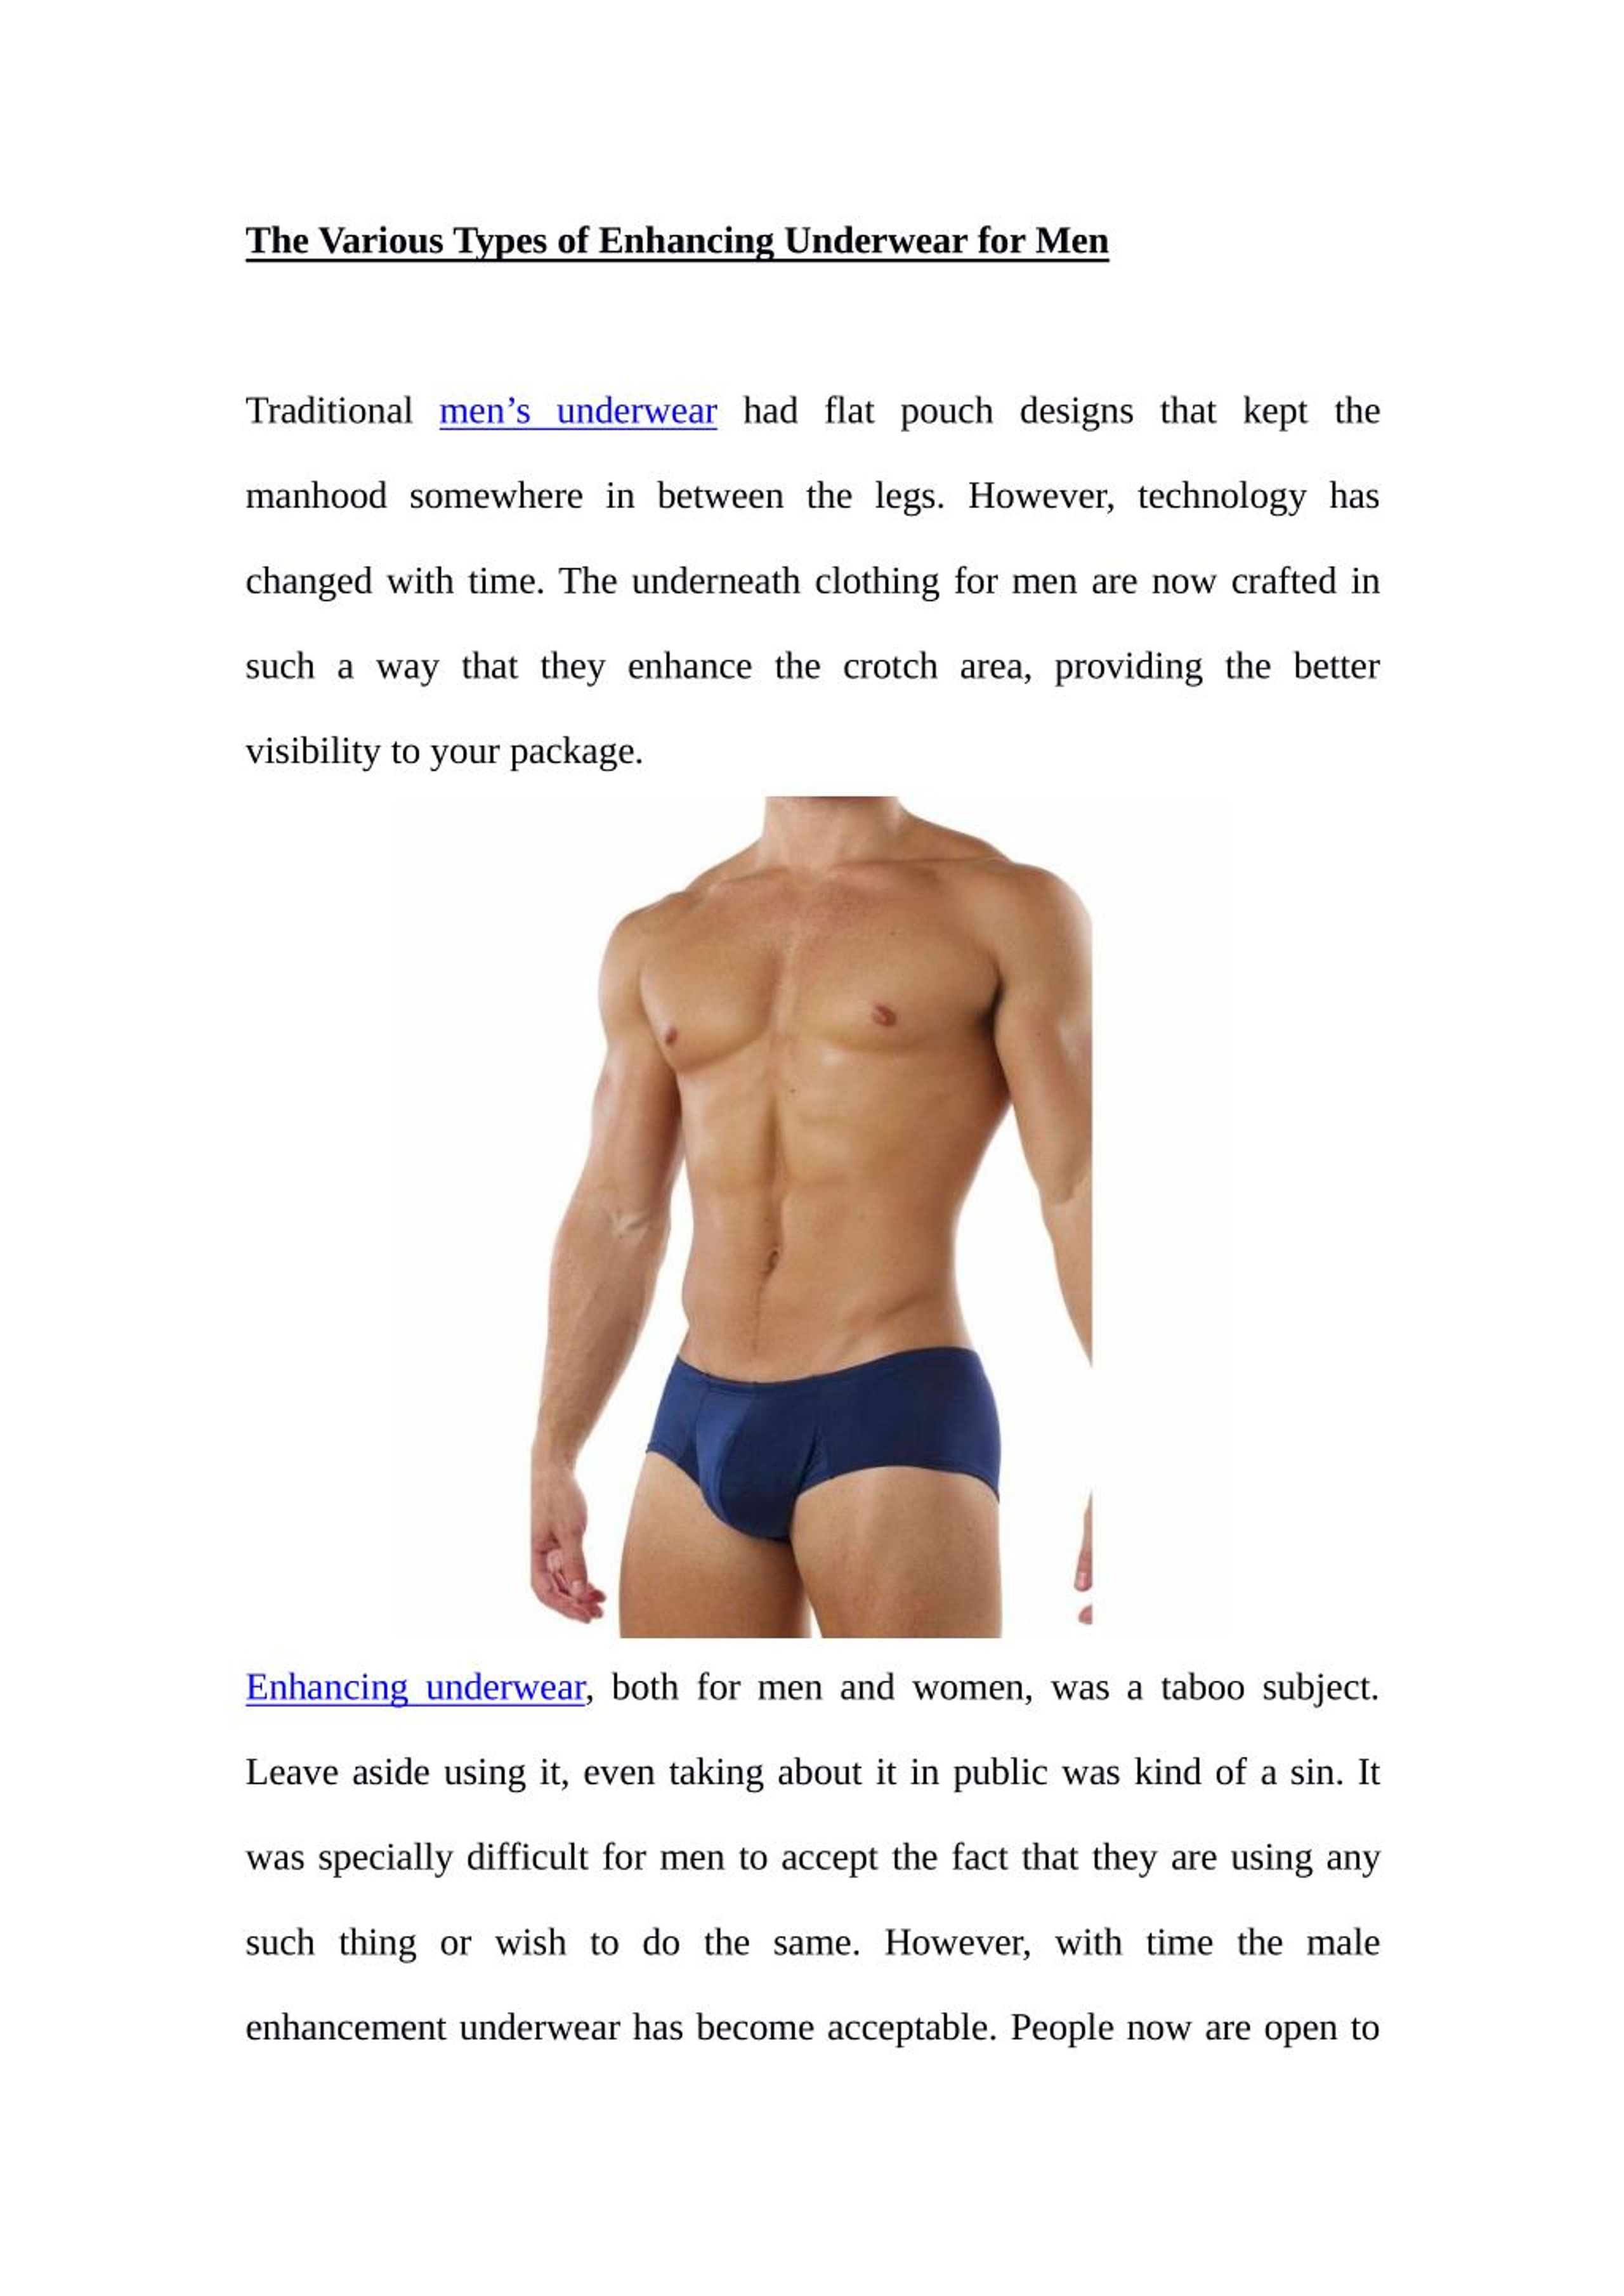 Why Men Wear Men's Thongs by Keeping All Myths Aside? – Mensuas